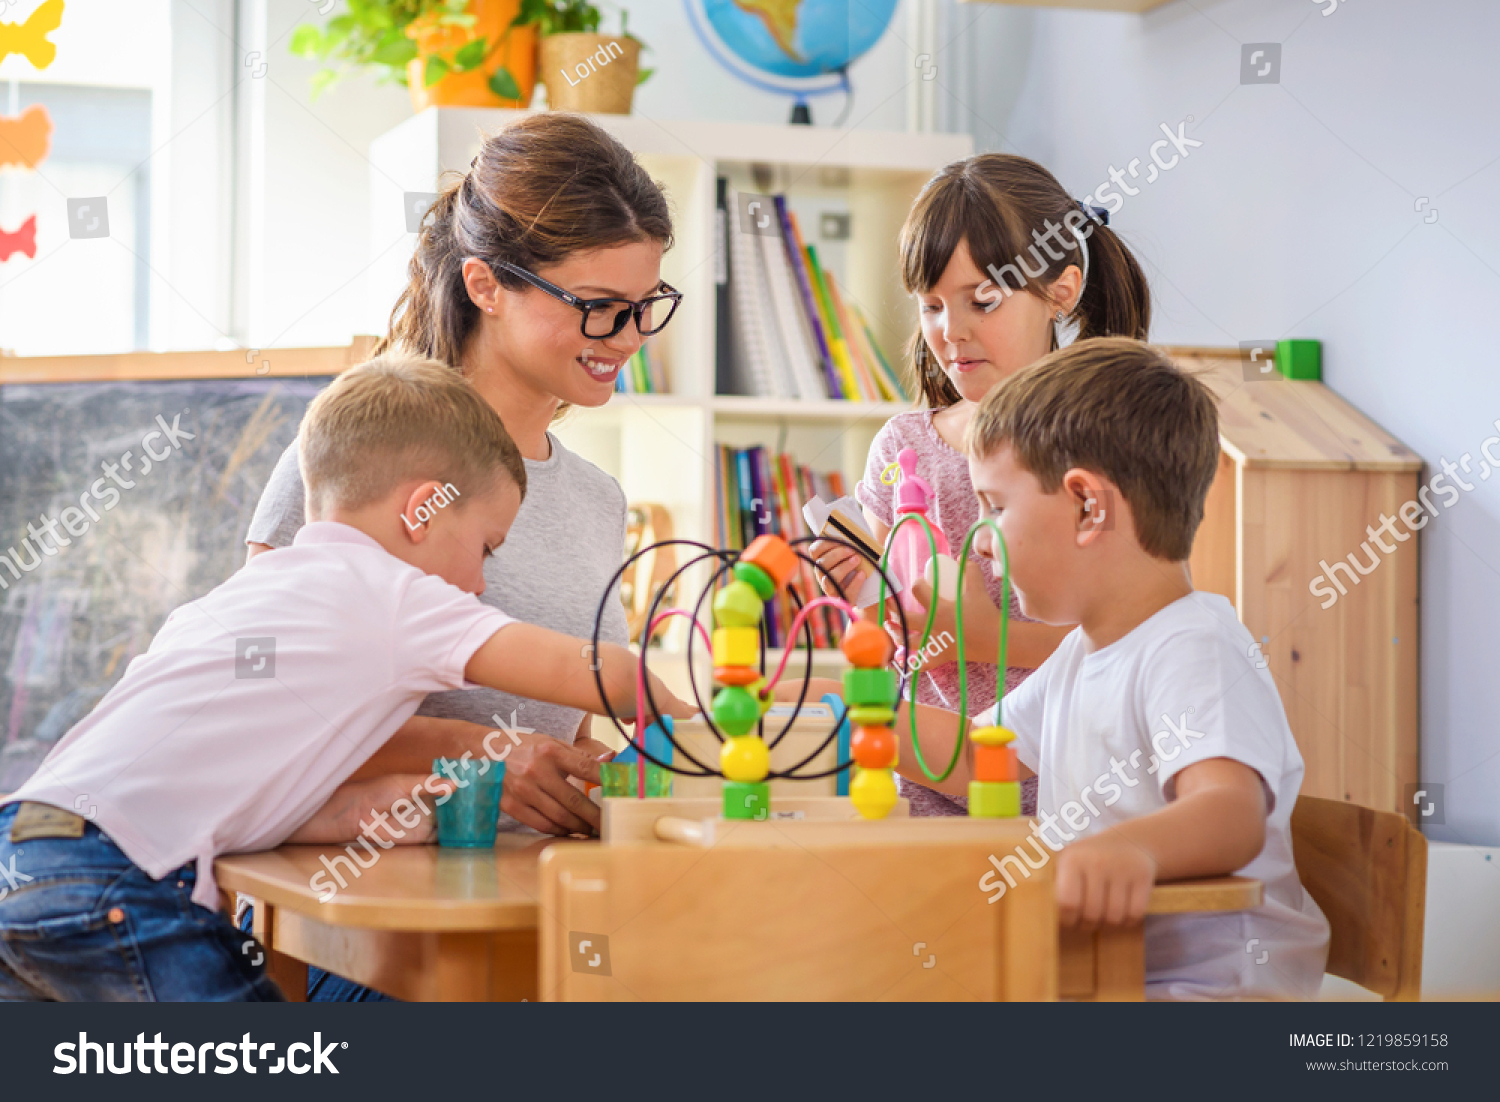 Preschool teacher with children playing with colorful wooden didactic toys at kindergarten #1219859158